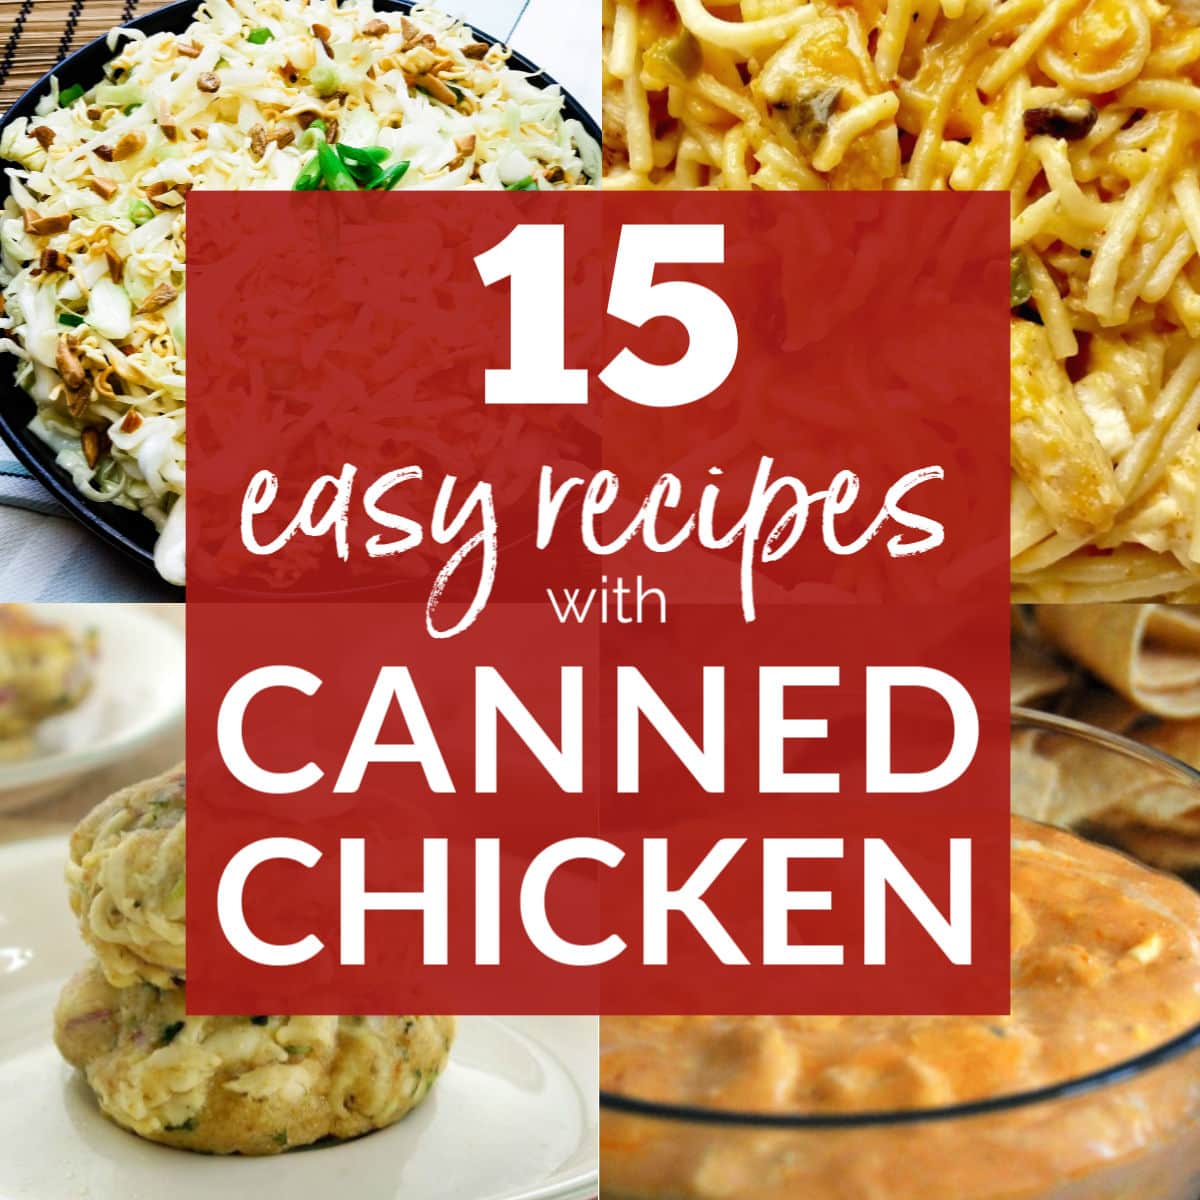 15 Easy Recipes with Canned Chicken Breast | A Reinvented Mom